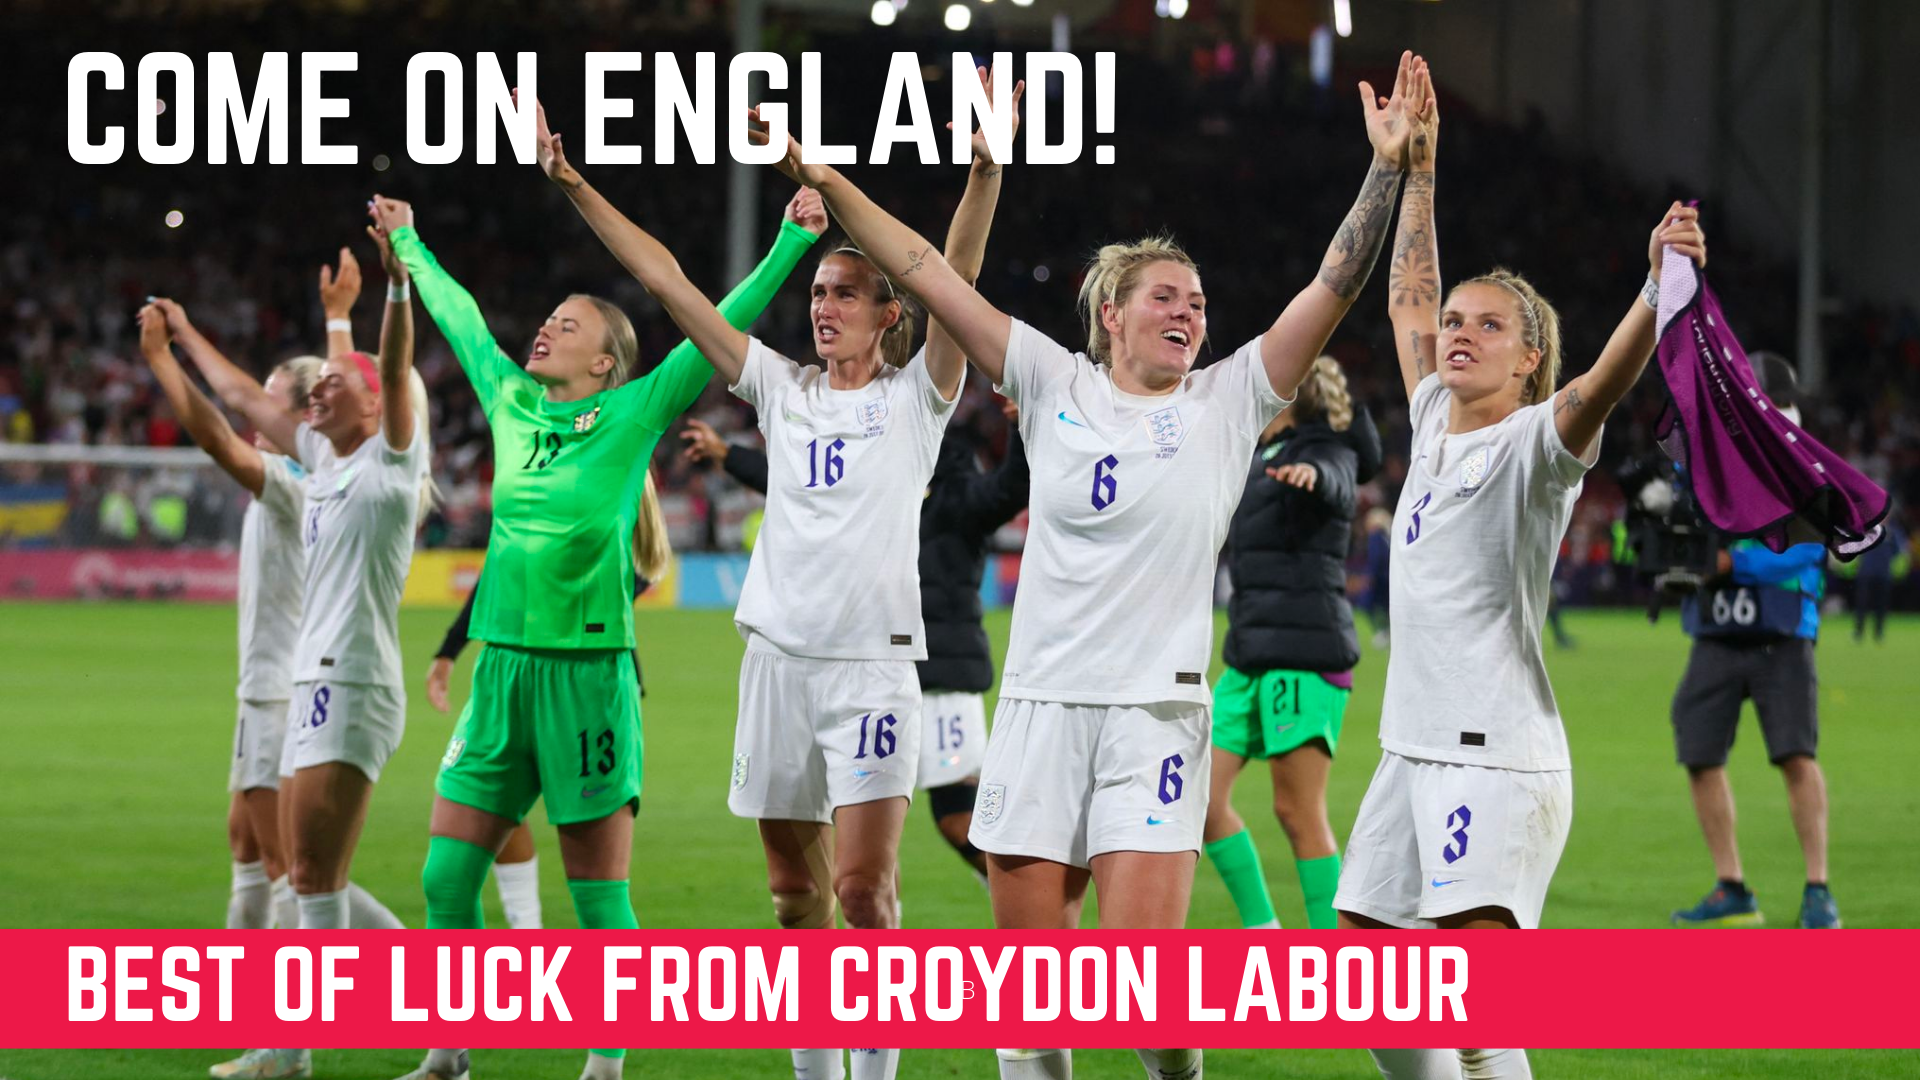 The Lionesses have inspired the whole country this summer. We are all behind you. One more game – you can do it. Come on England!